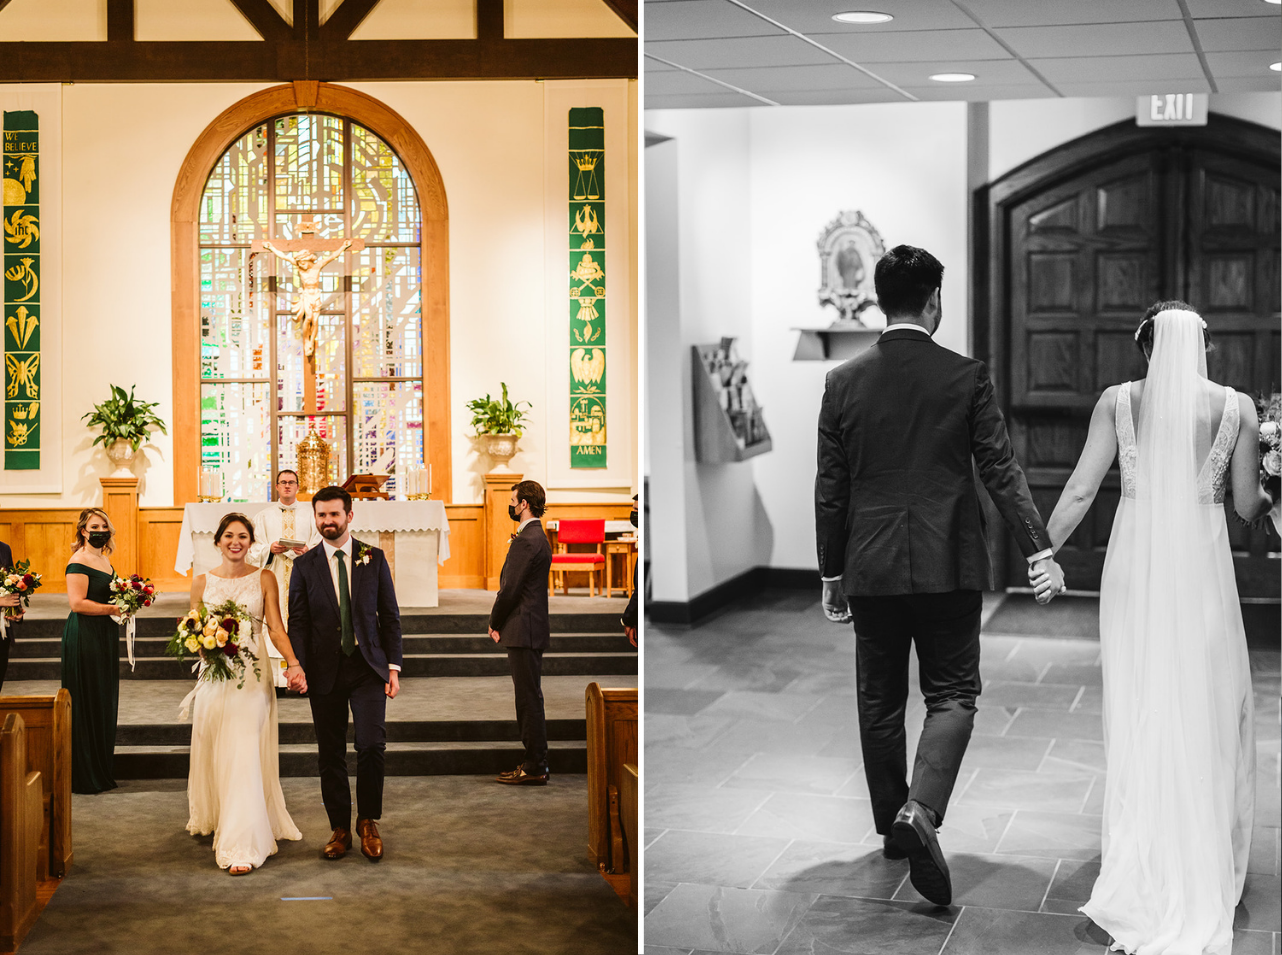 Bride and groom walk hand-in-hand back down the aisle after their church wedding ceremony.